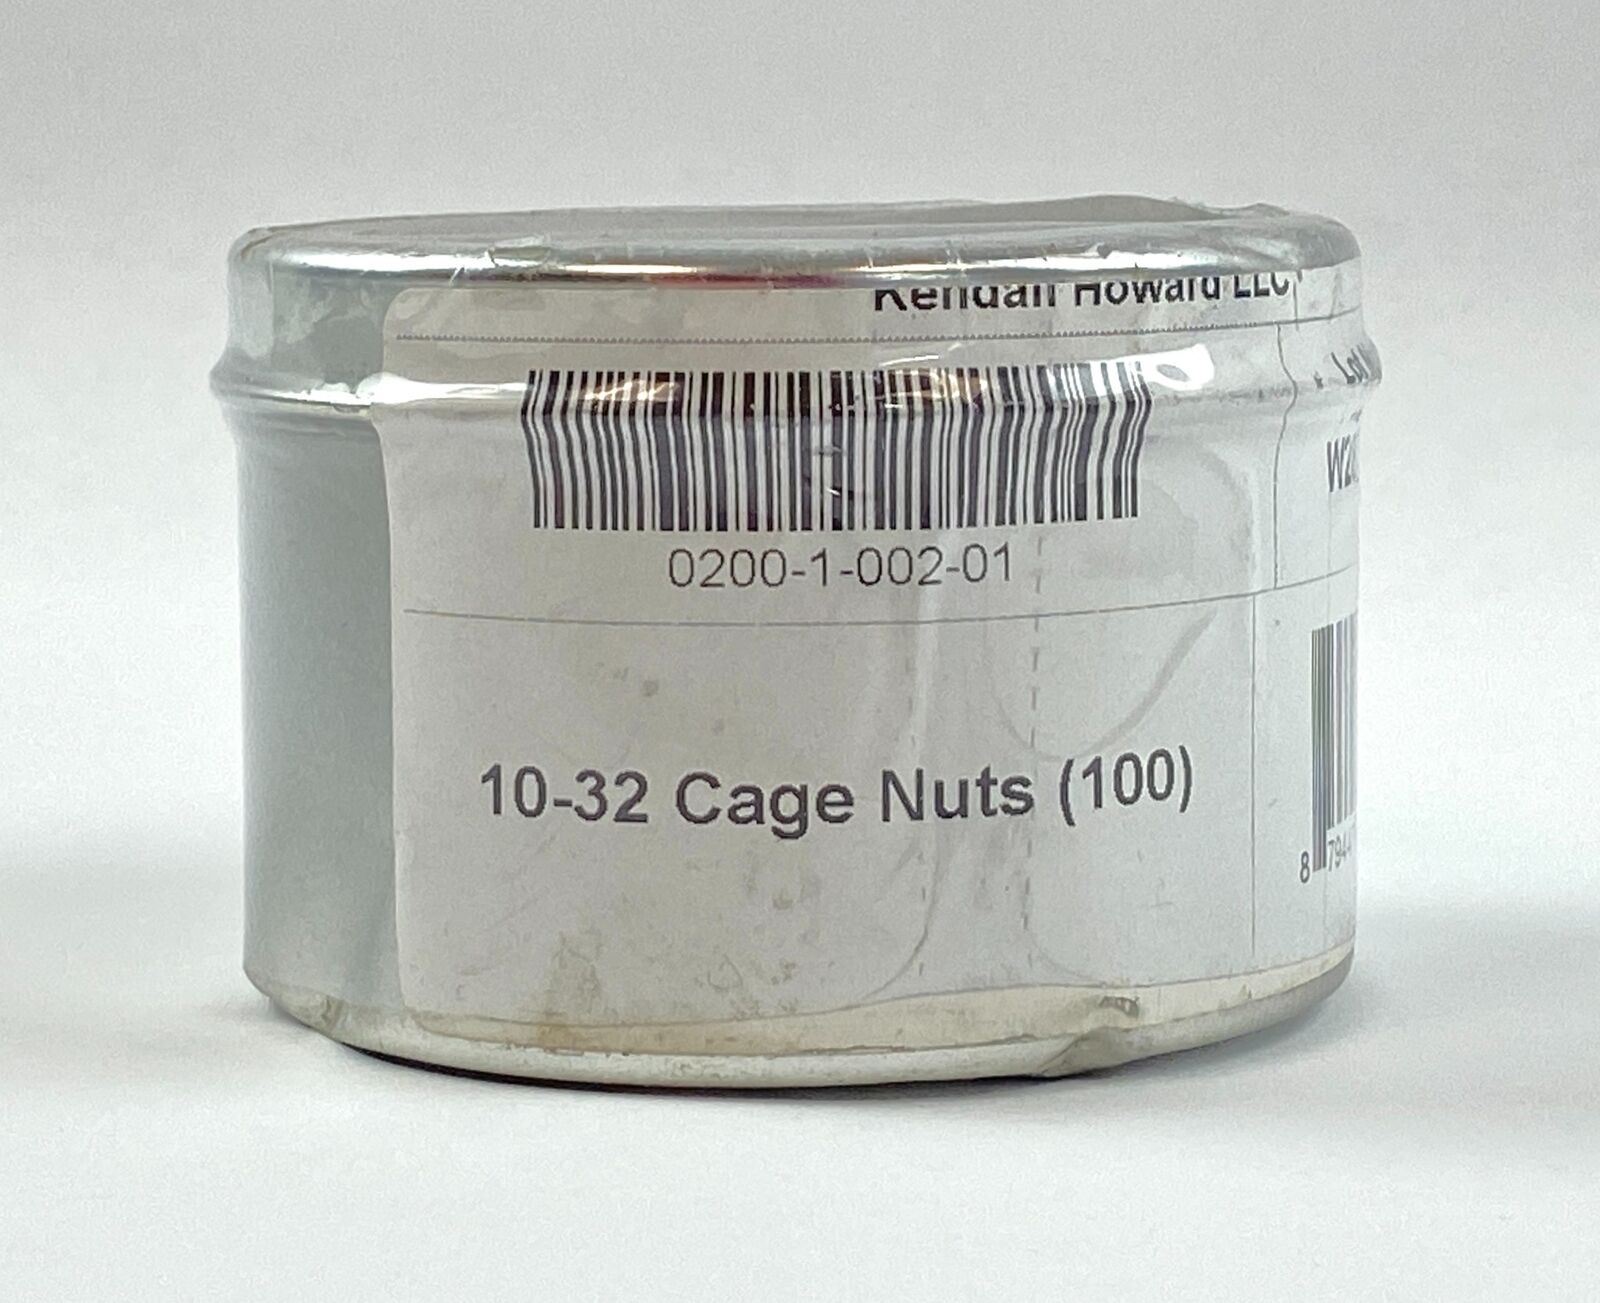 Kendall Howard 0200-1-002-01 Silver Cage Nuts 10-32 100-Pack